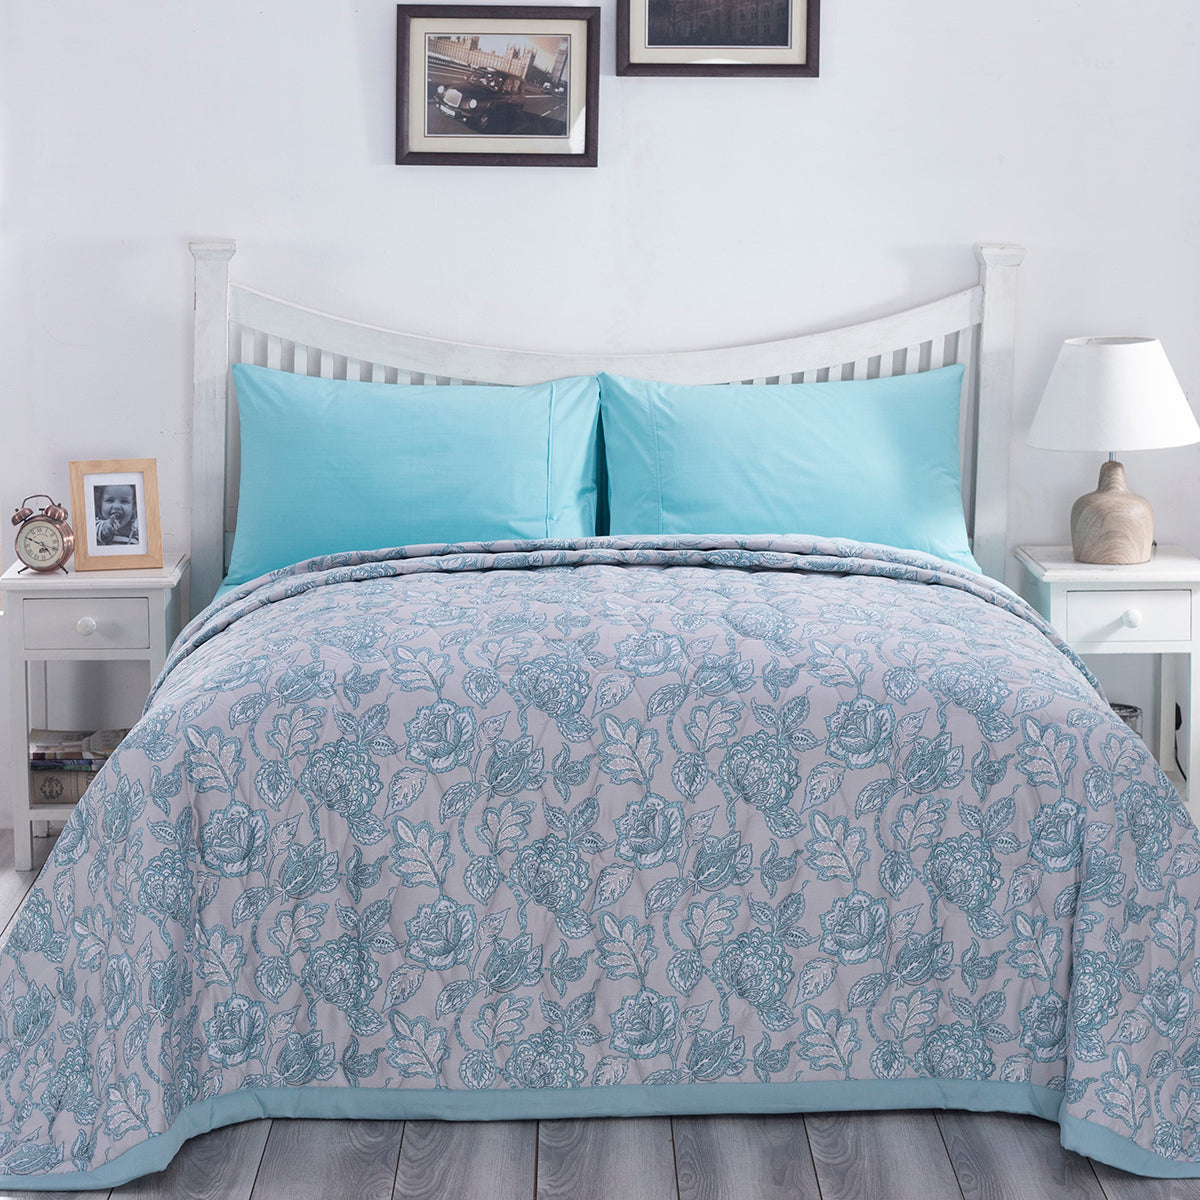 PBS Nomad Scuplt Orlean Summer AC Quilt/Quilted Bed Cover/Comforter Blue